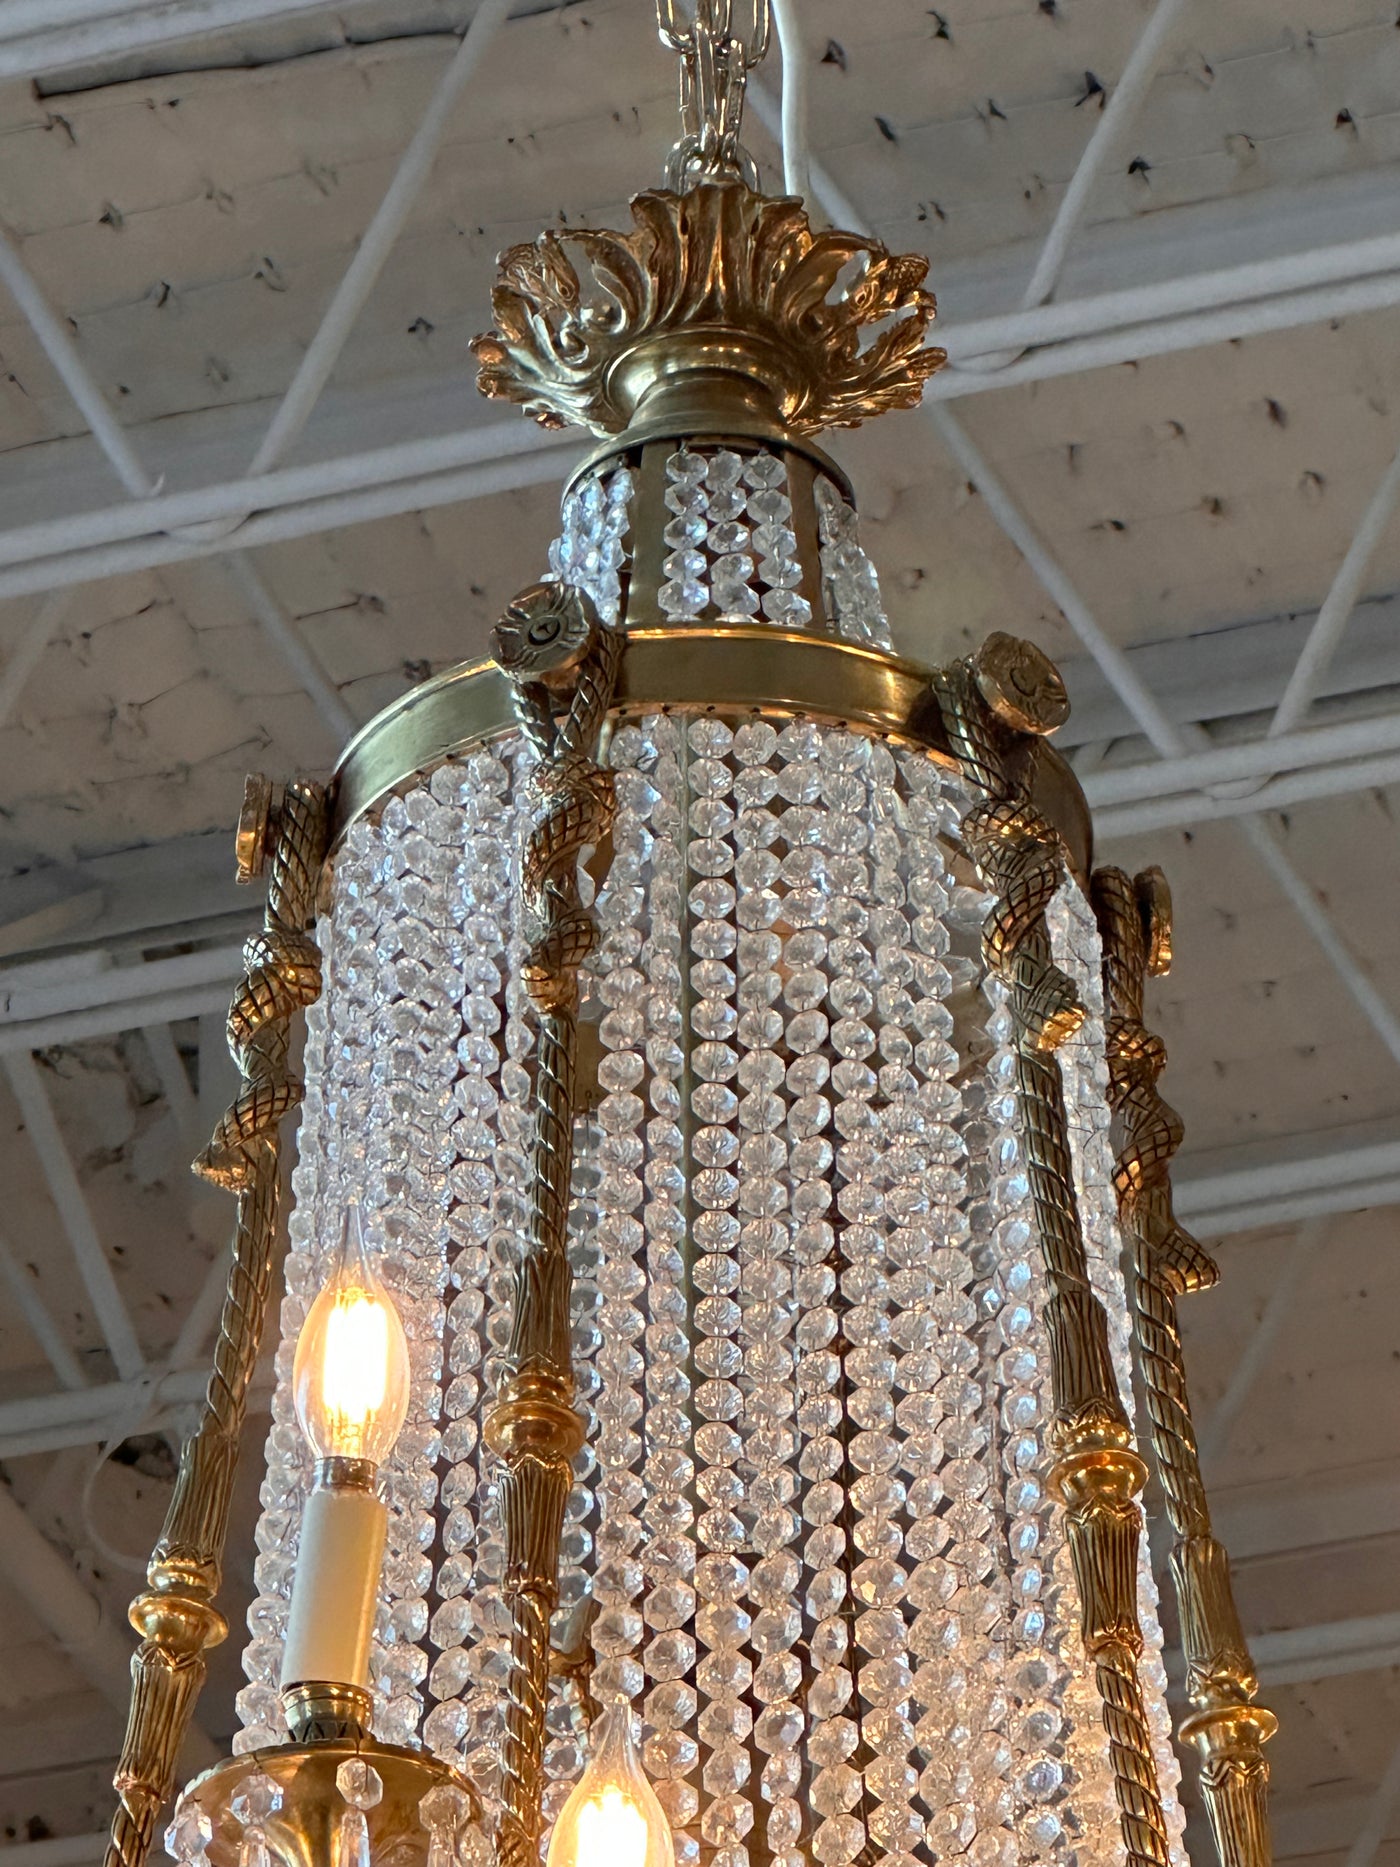 Empire Chandelier with Candelabra Rows